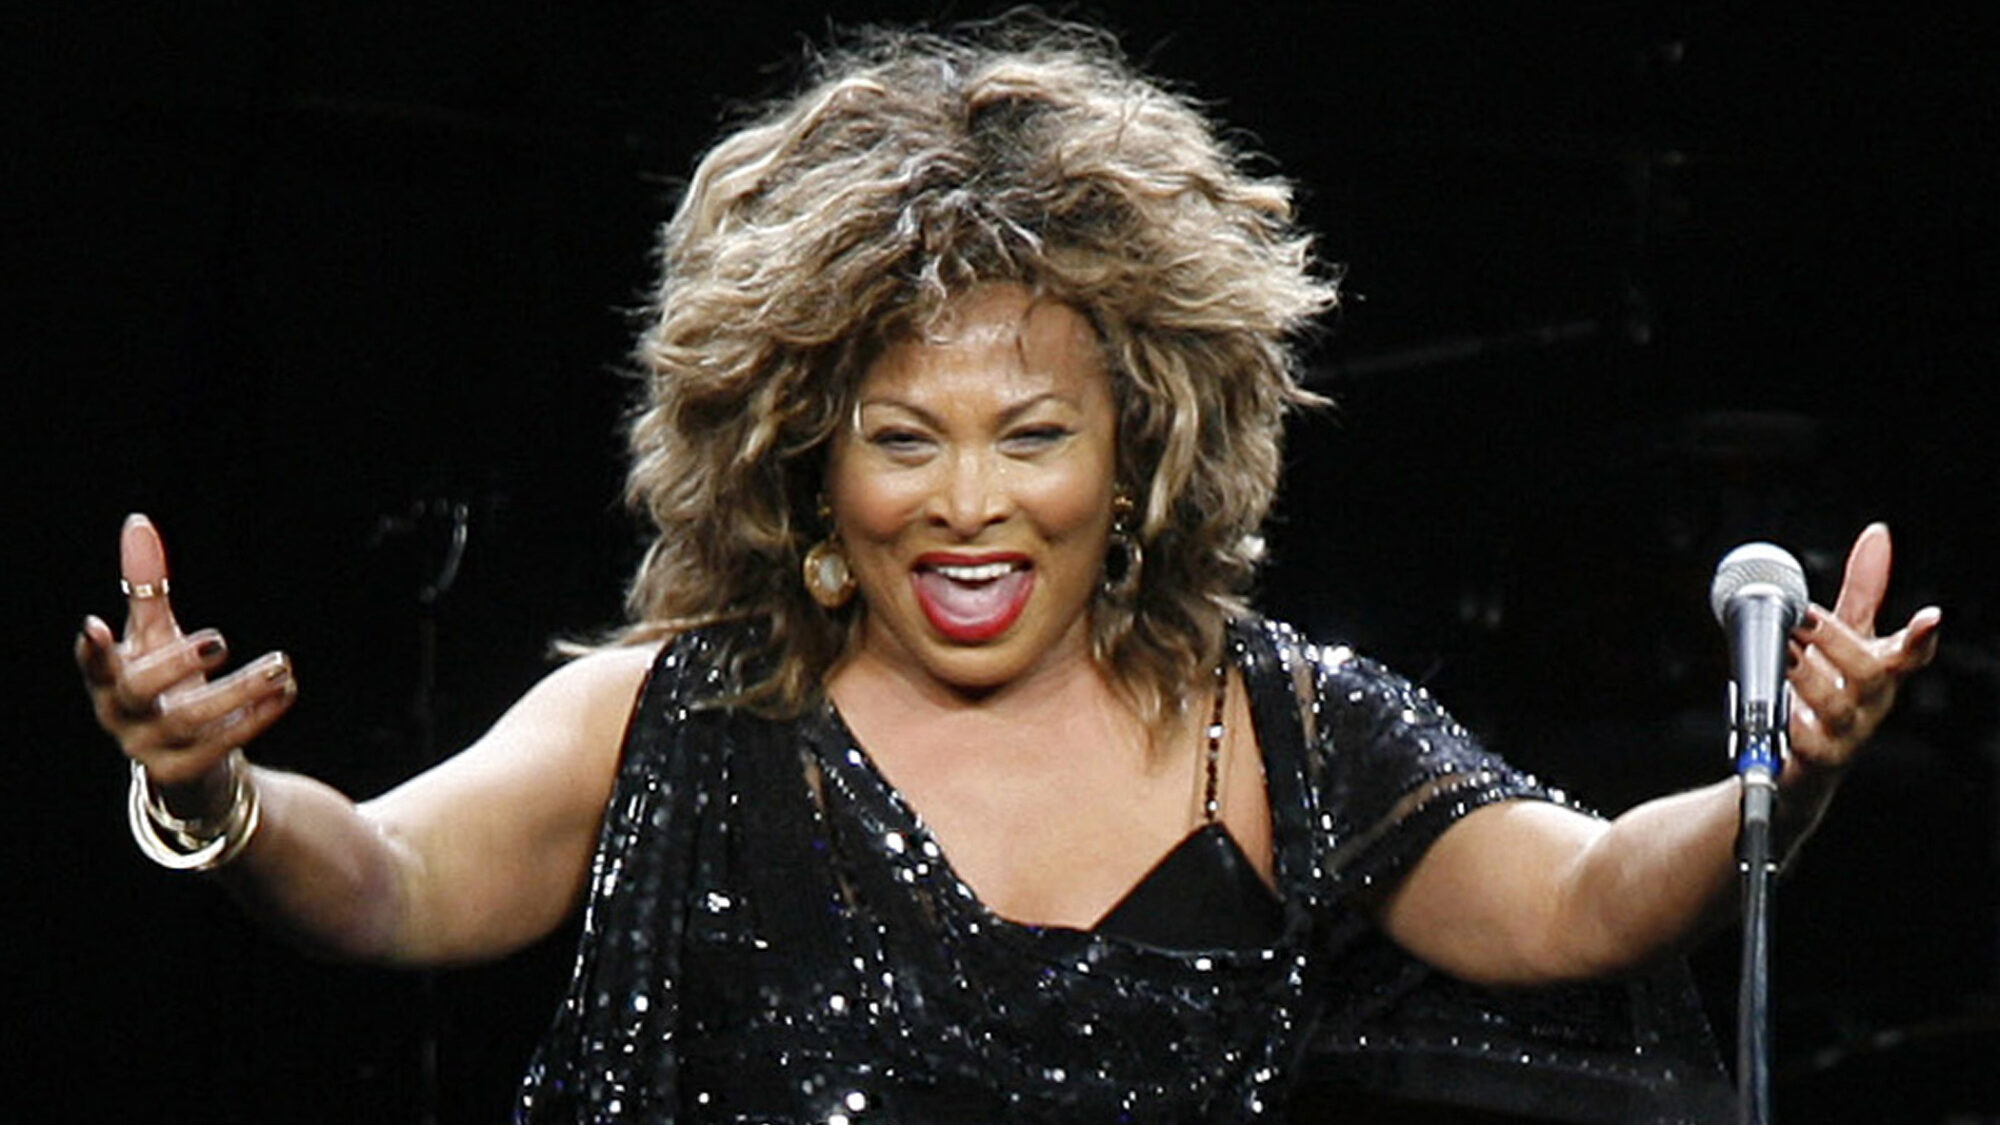 Tina Turner, the unstoppable singer and stage performer who teamed with husband Ike Turner for a dy...